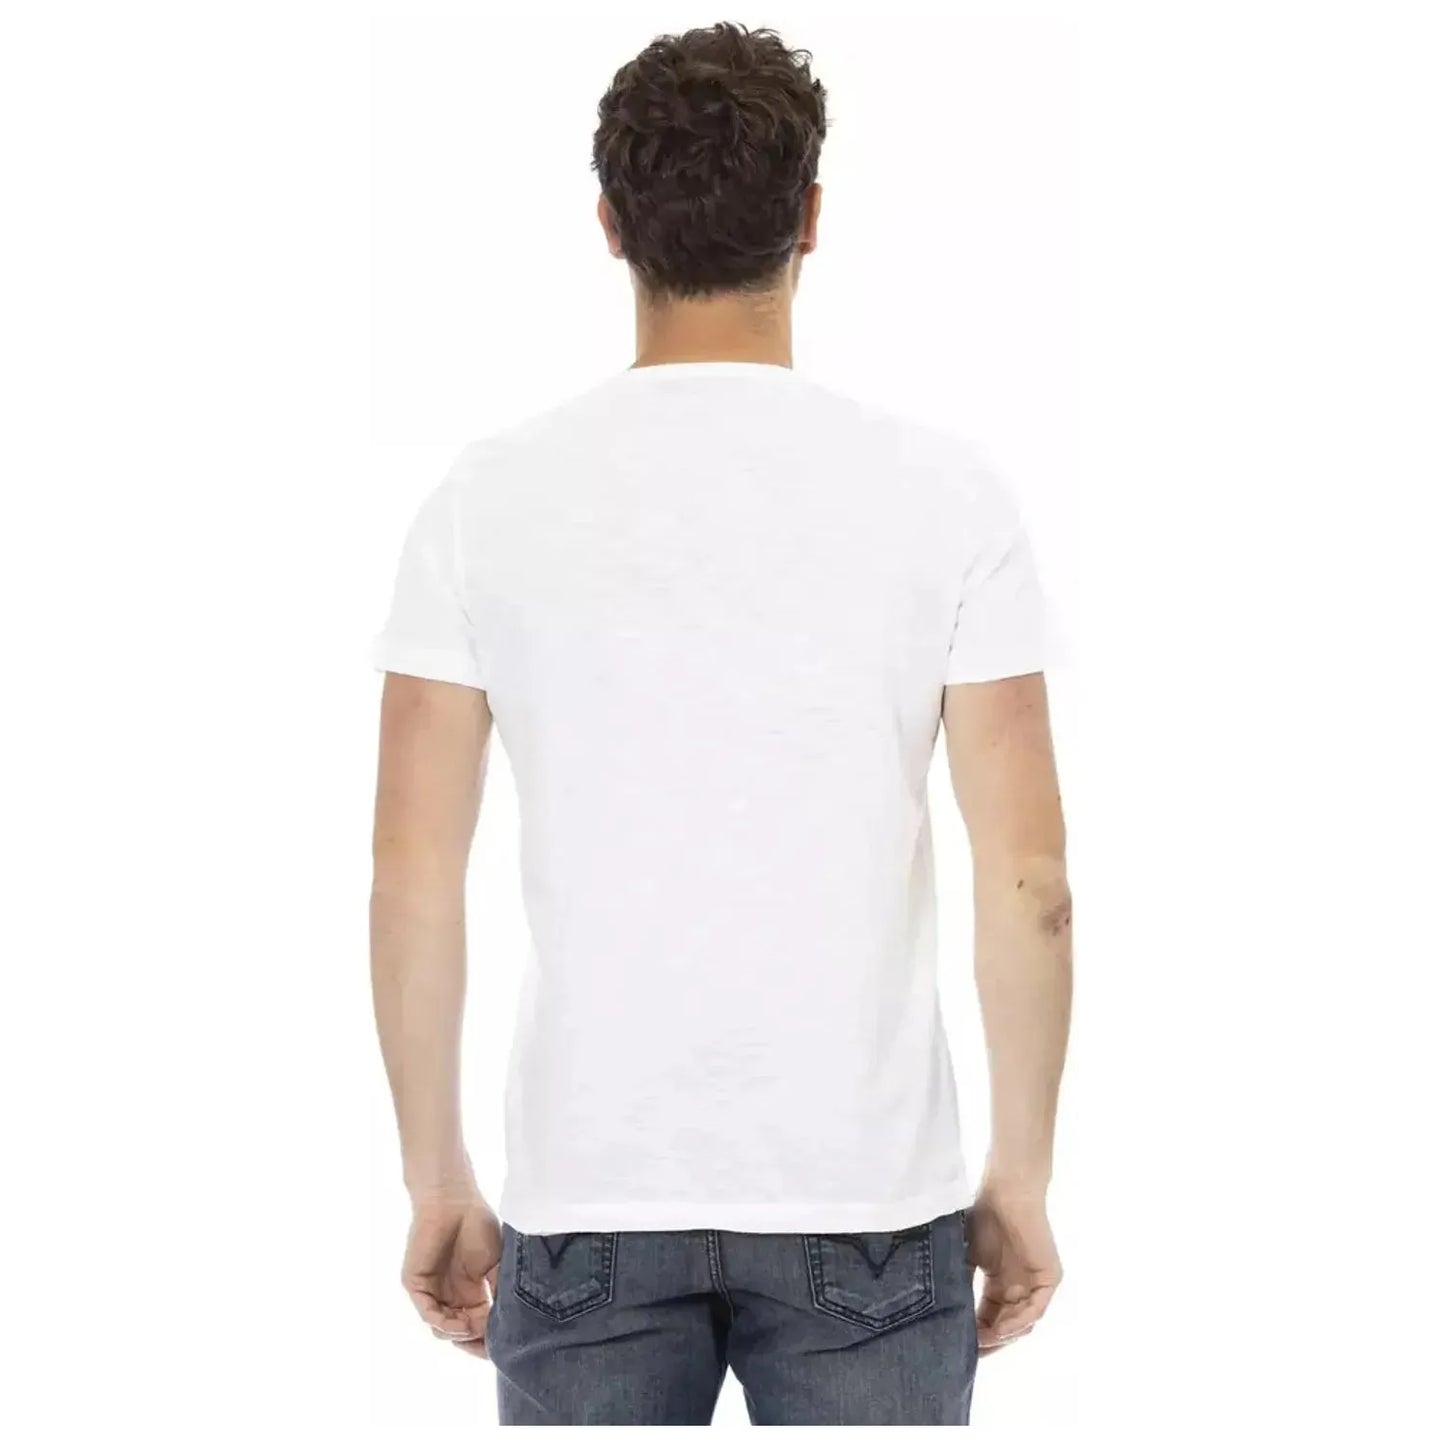 Trussardi Action Chic White Tee with Front Print white-cotton-t-shirt-99